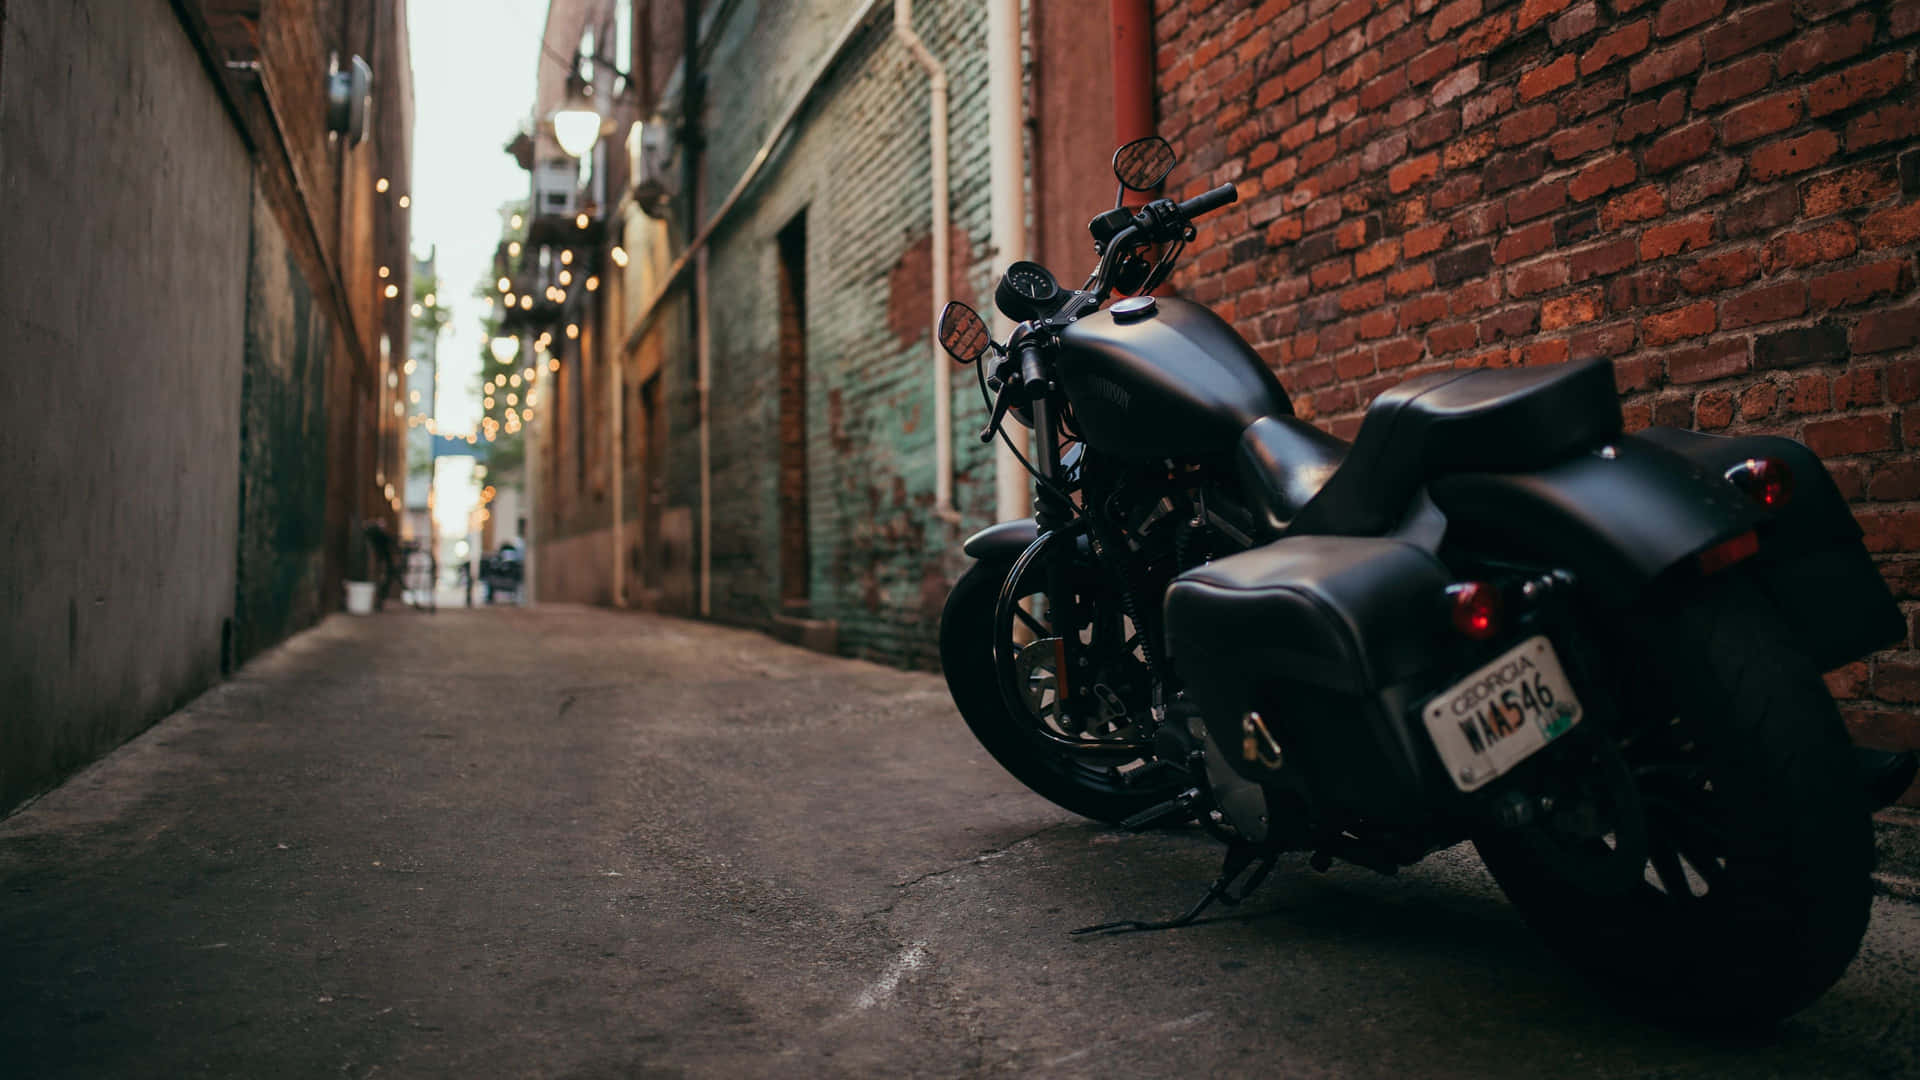 A Black Motorcycle Parked In An Alleyway